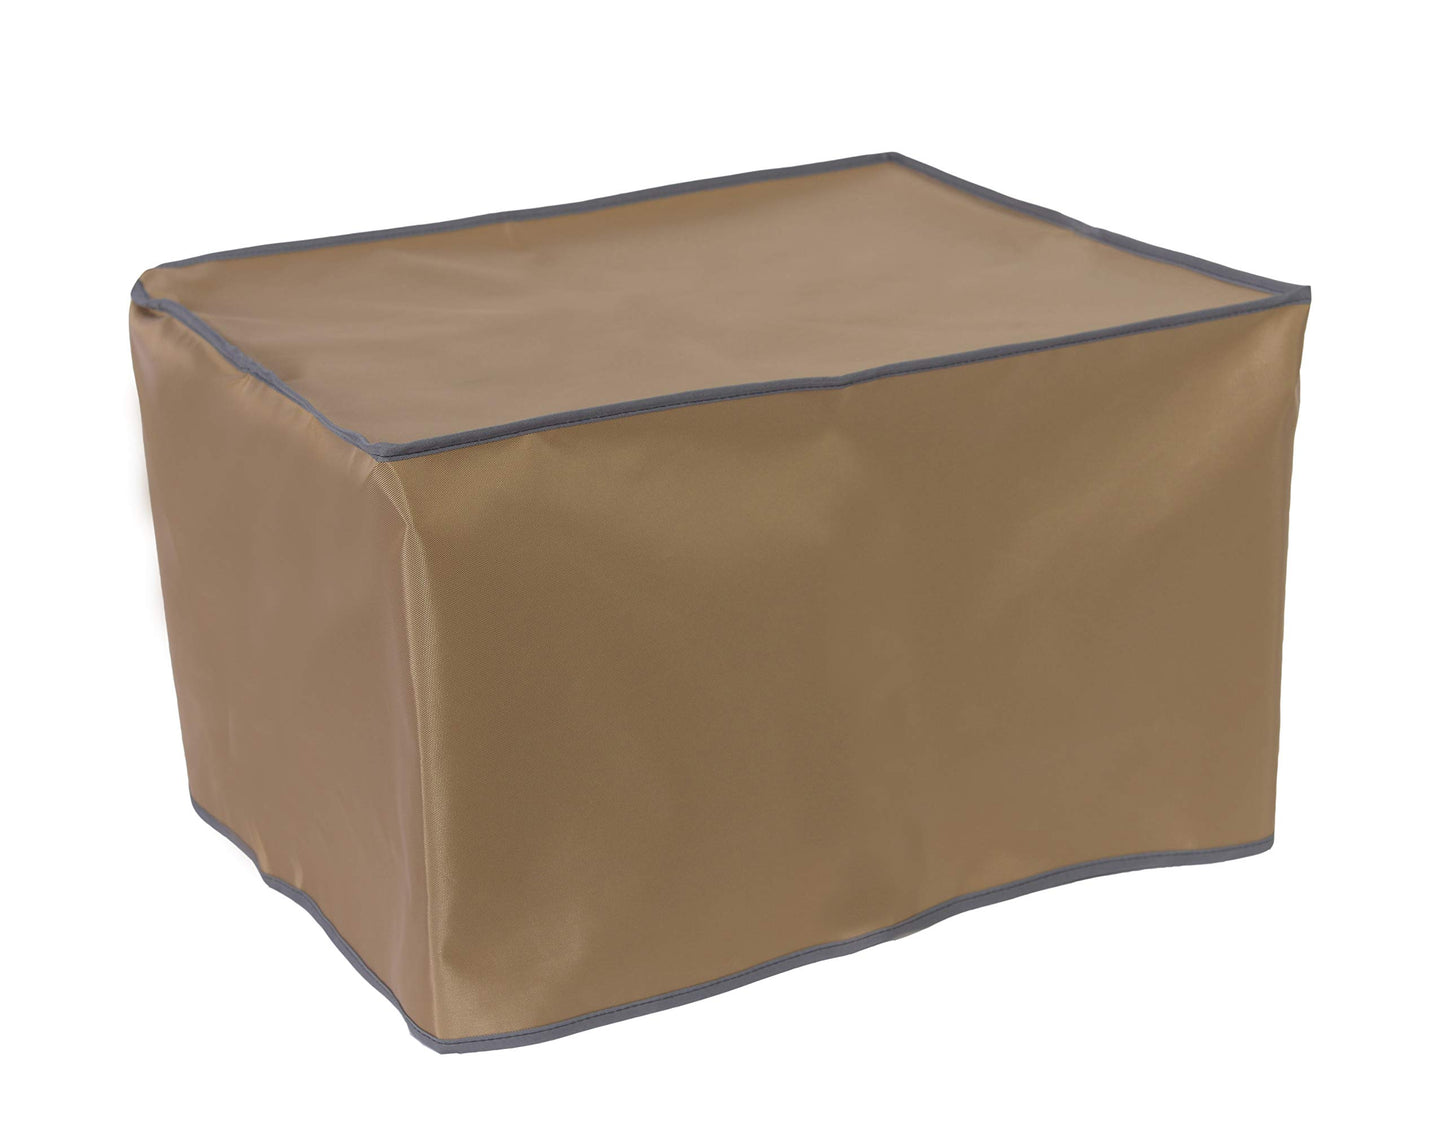 The Perfect Dust Cover, Tan Nylon Cover Compatible with Epson EcoTank-Pro ET-5150 All-in-One Printer, Anti Static and Waterproof Dimensions 14.8''W x 13.7''D x 13.6''H by The Perfect Dust Cover